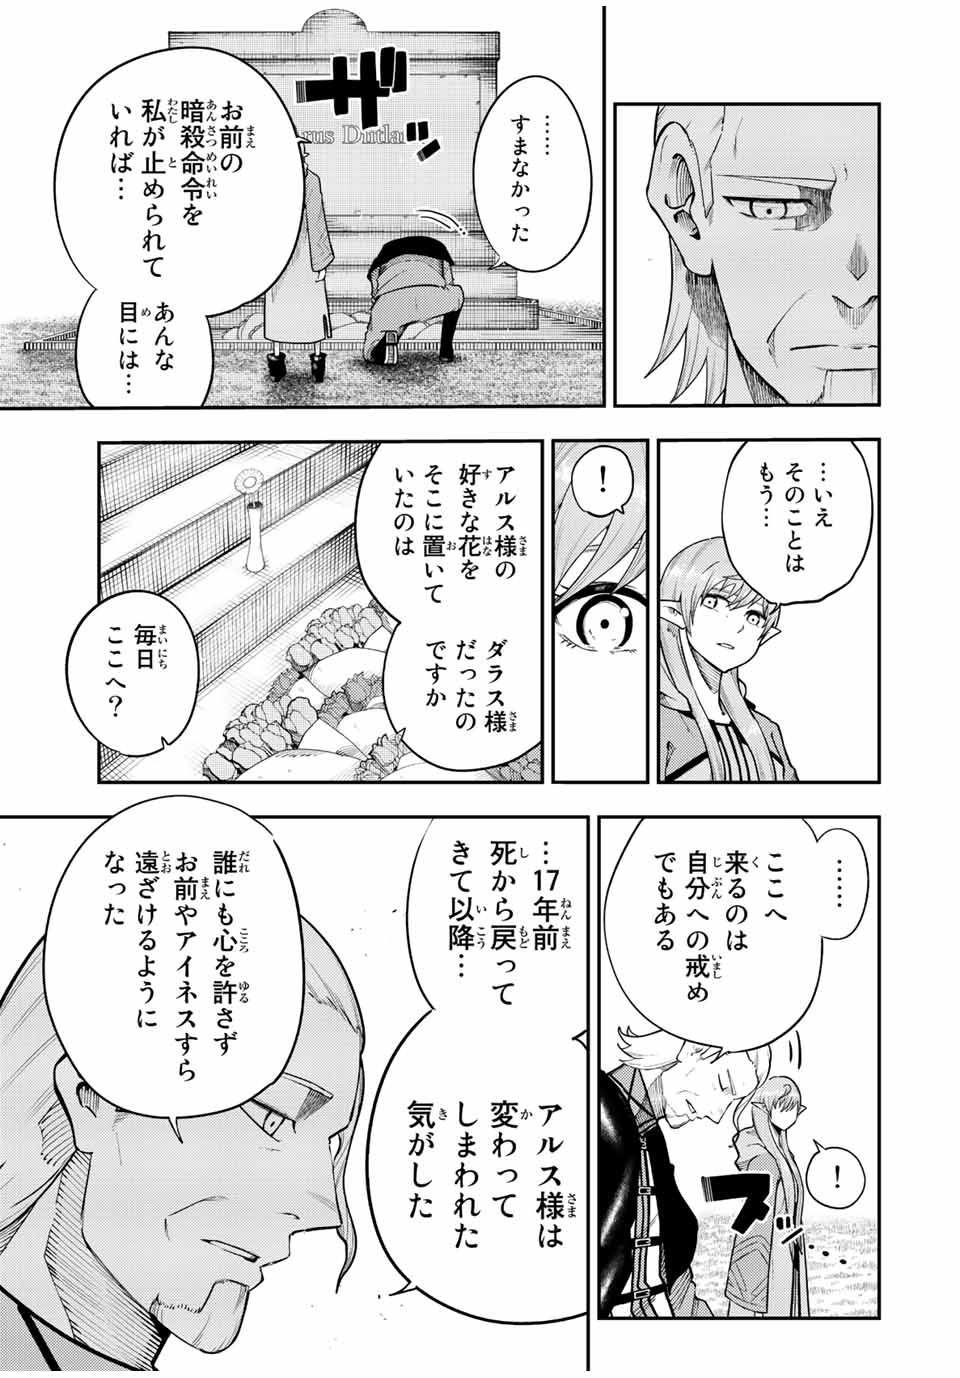 the strongest former prince-; 奴隷転生 ～その奴隷、最強の元王子につき～ 第116話 - Page 5